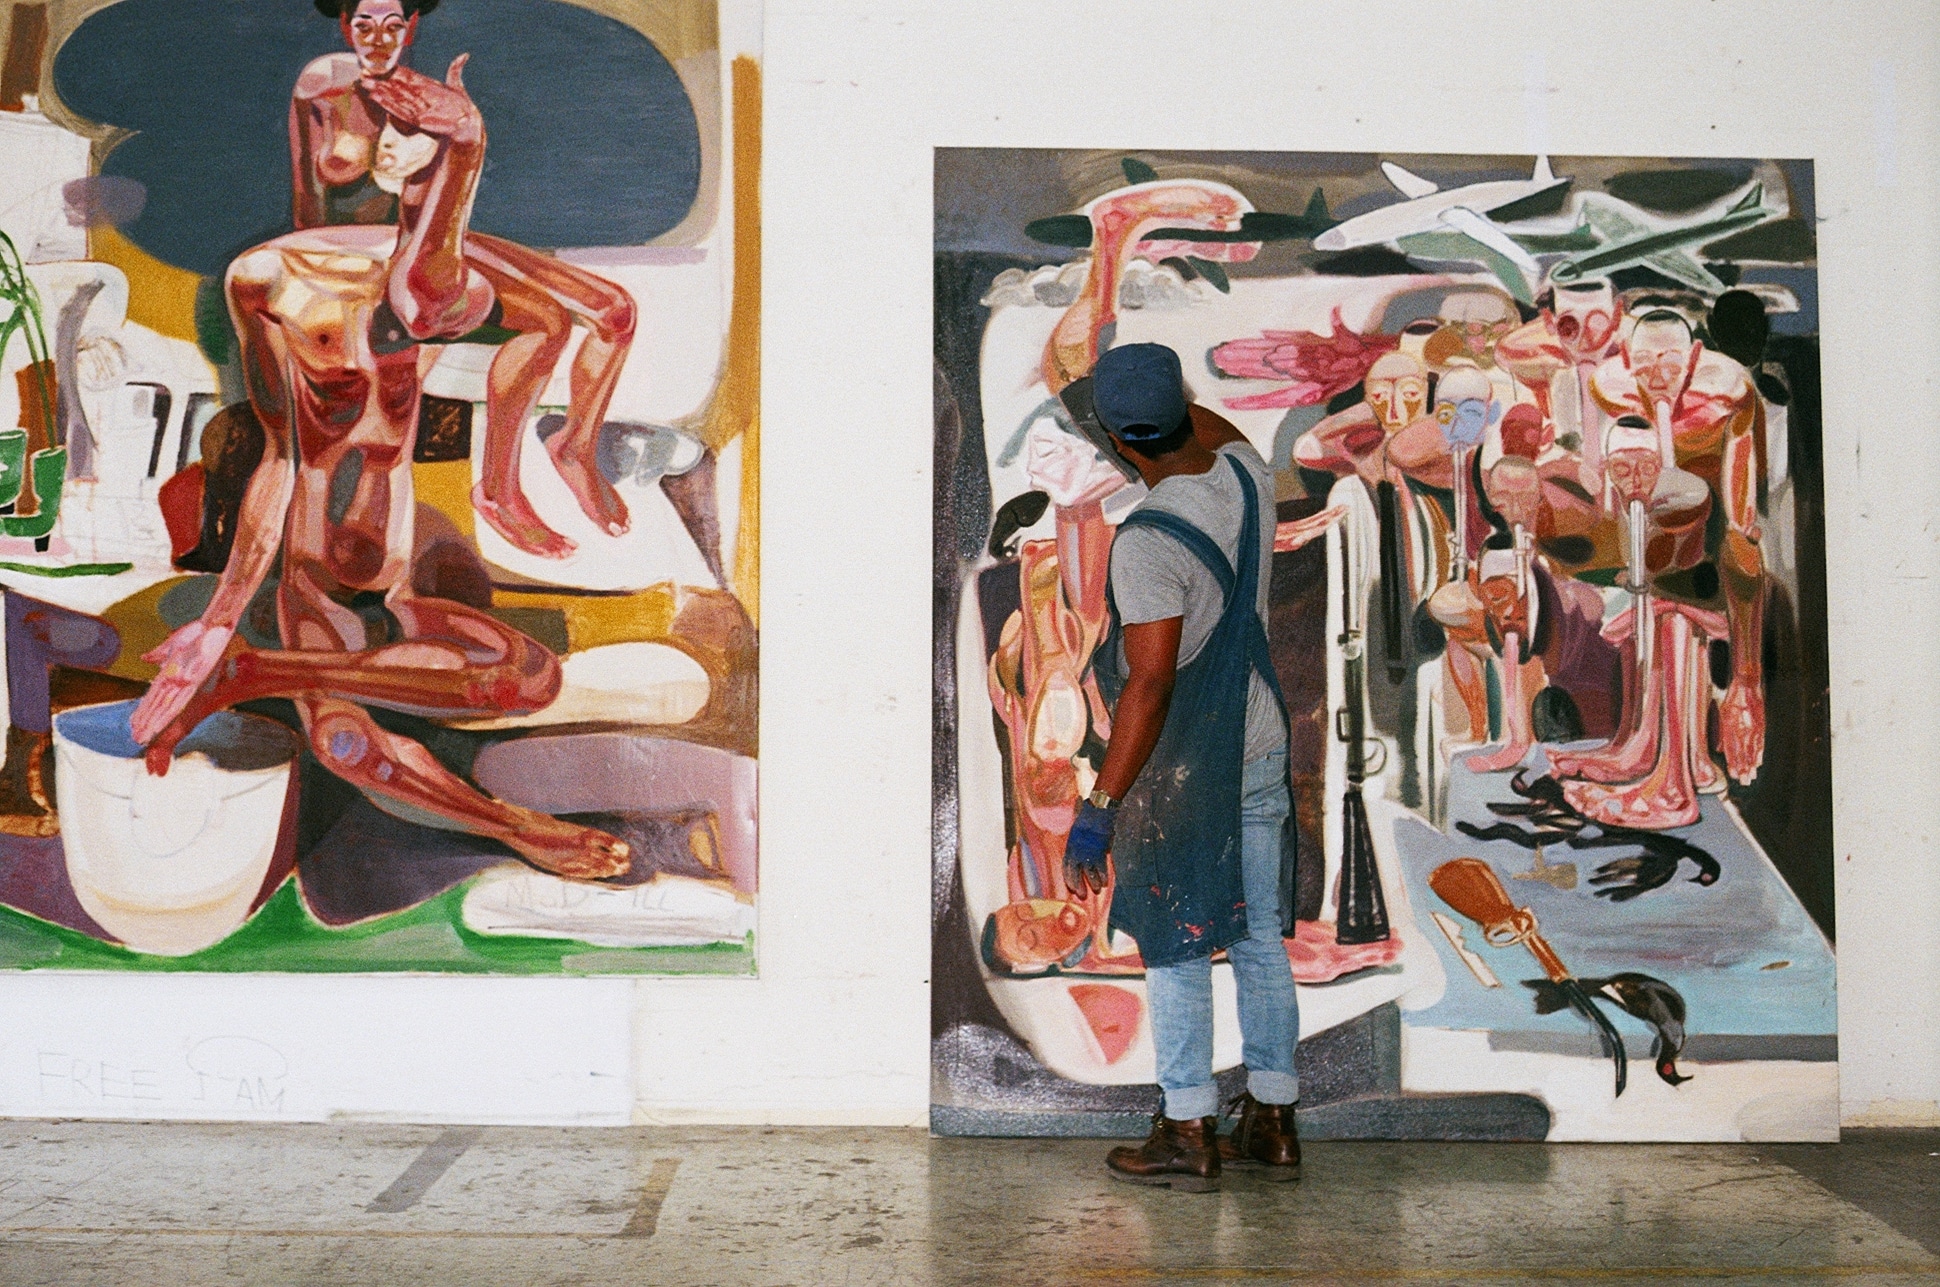 Ethiopian Contemporary artist Tesfaye Urgessa working on two paintings